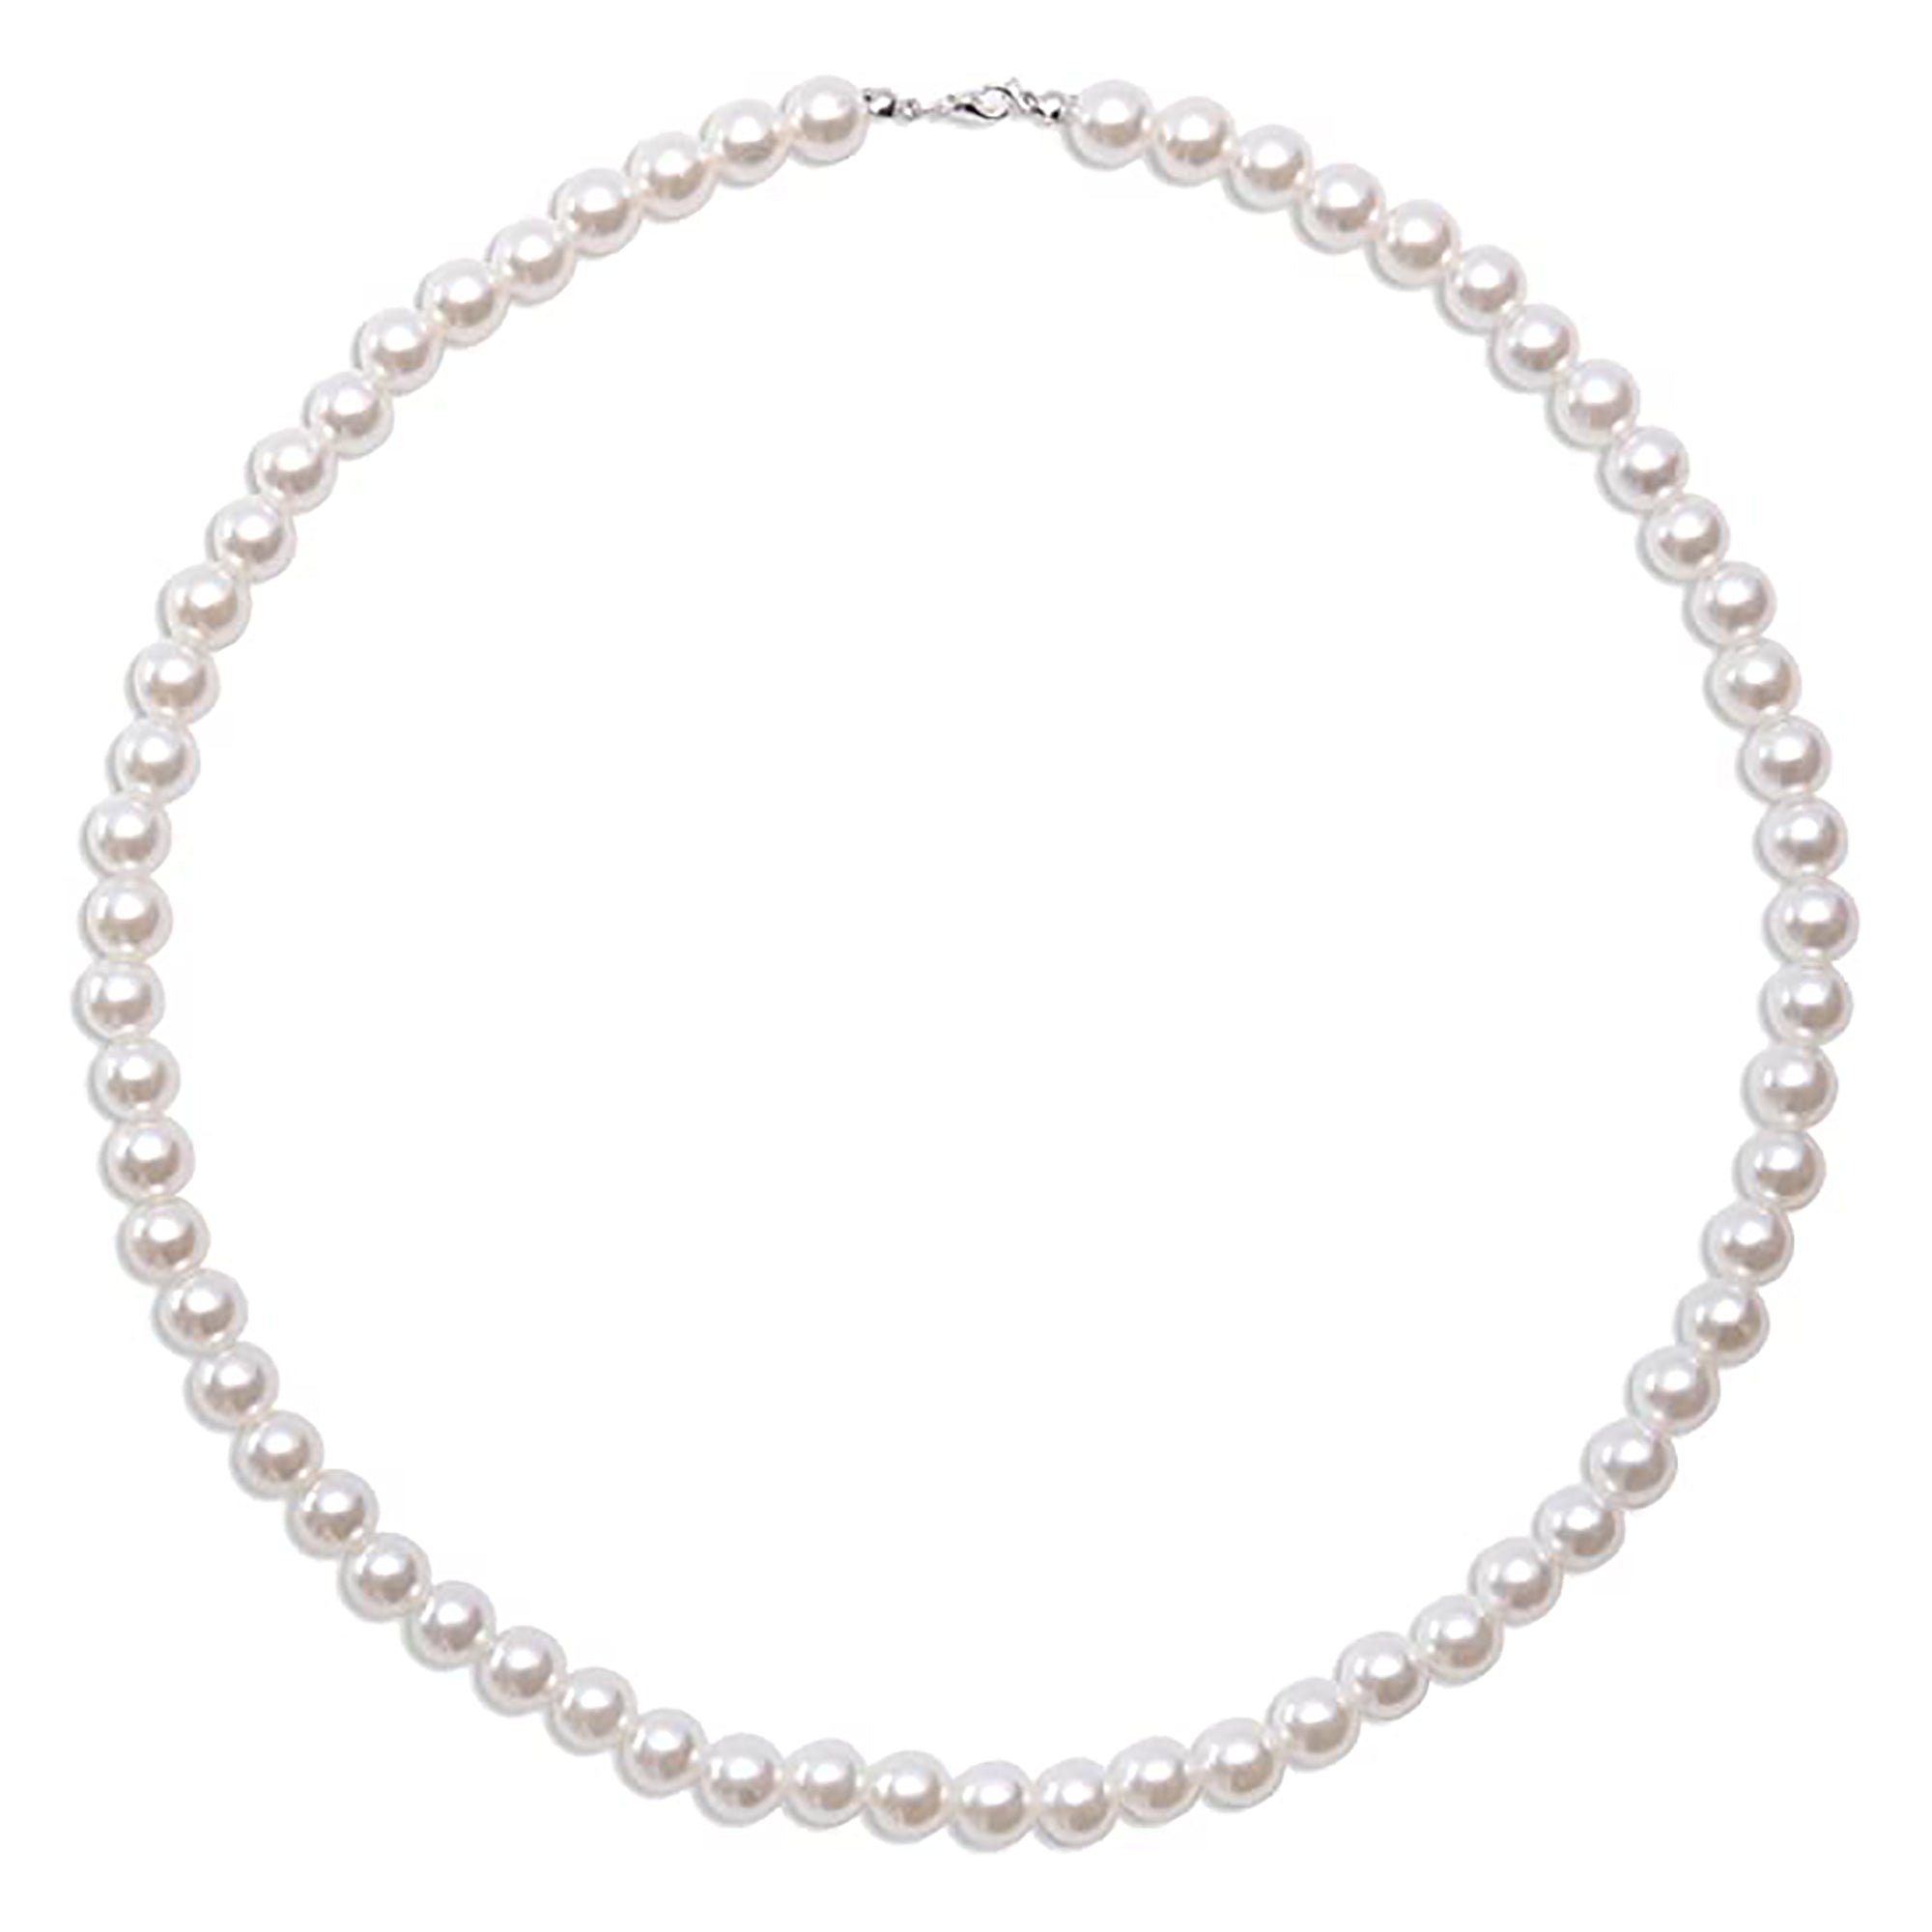 10 mm / 15 inches Pearl Necklace